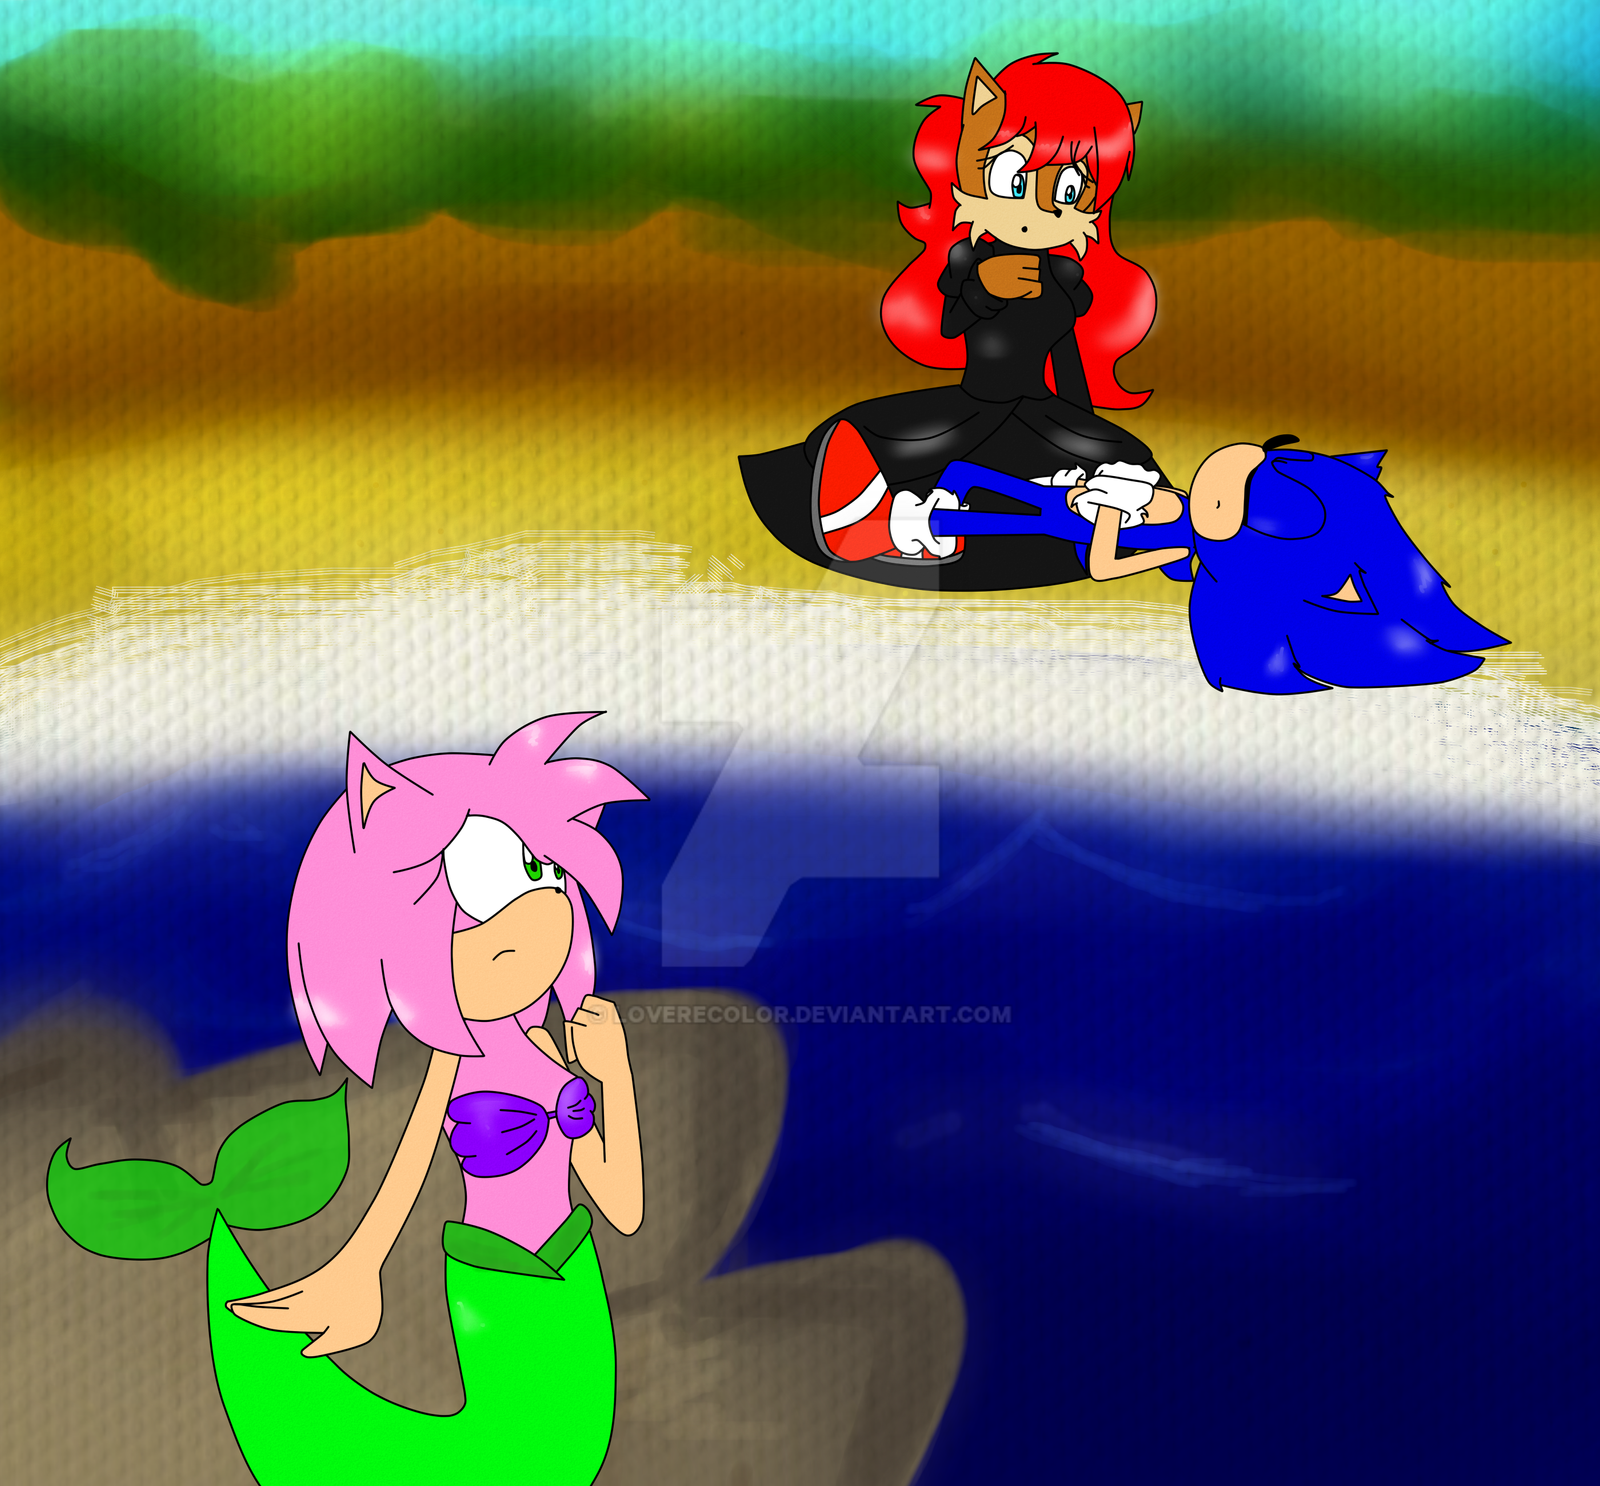 The little mermaid Amy by lOvErEcoLoR on DeviantArt